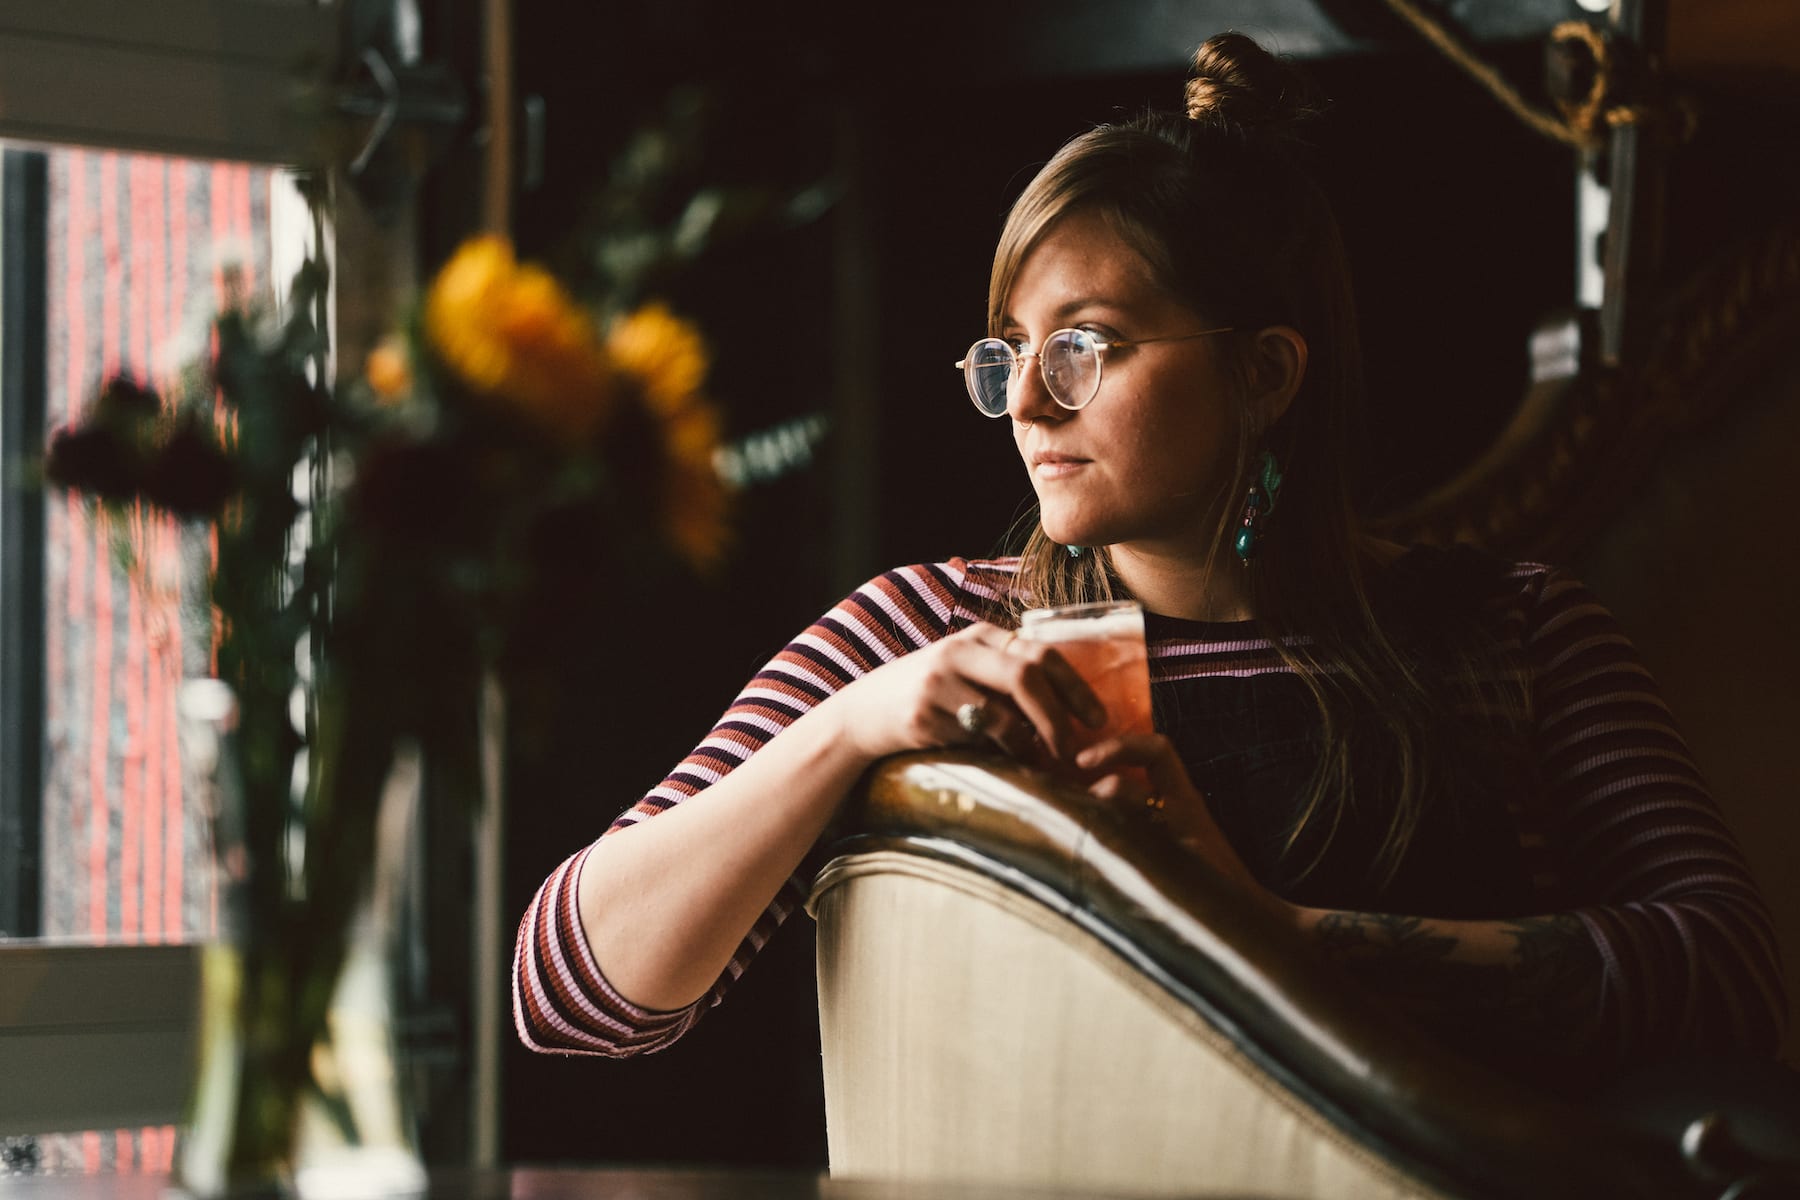 Brew Urban Cafe Woman wearing glasses in a brown striped dress shirt holding an iced drink looking off camera